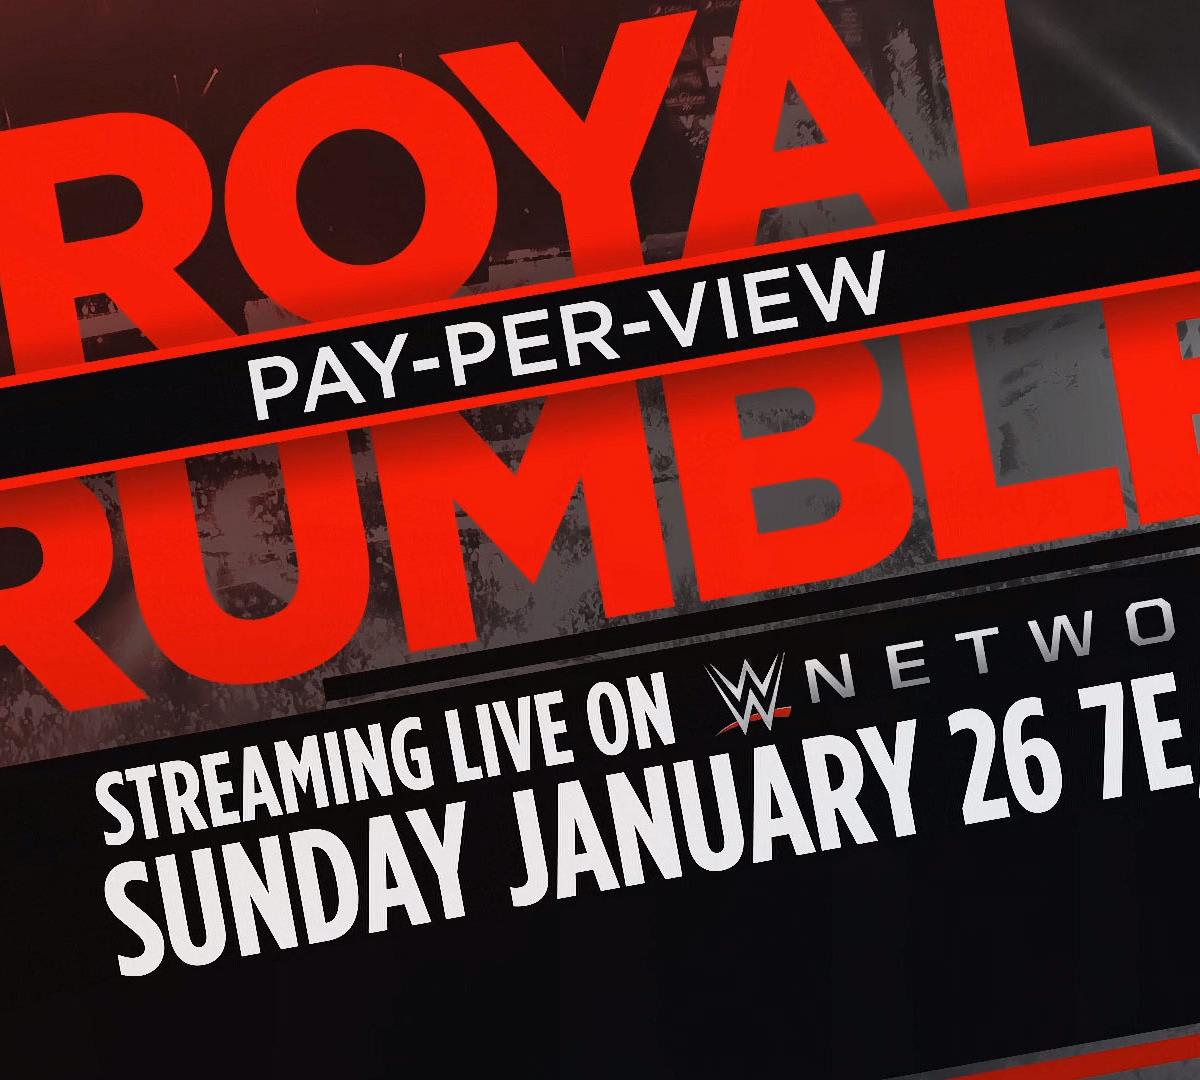 Final Predictions for Lesnar, Lynch, Fiend and WWE Royal Rumble 2020 Match Card